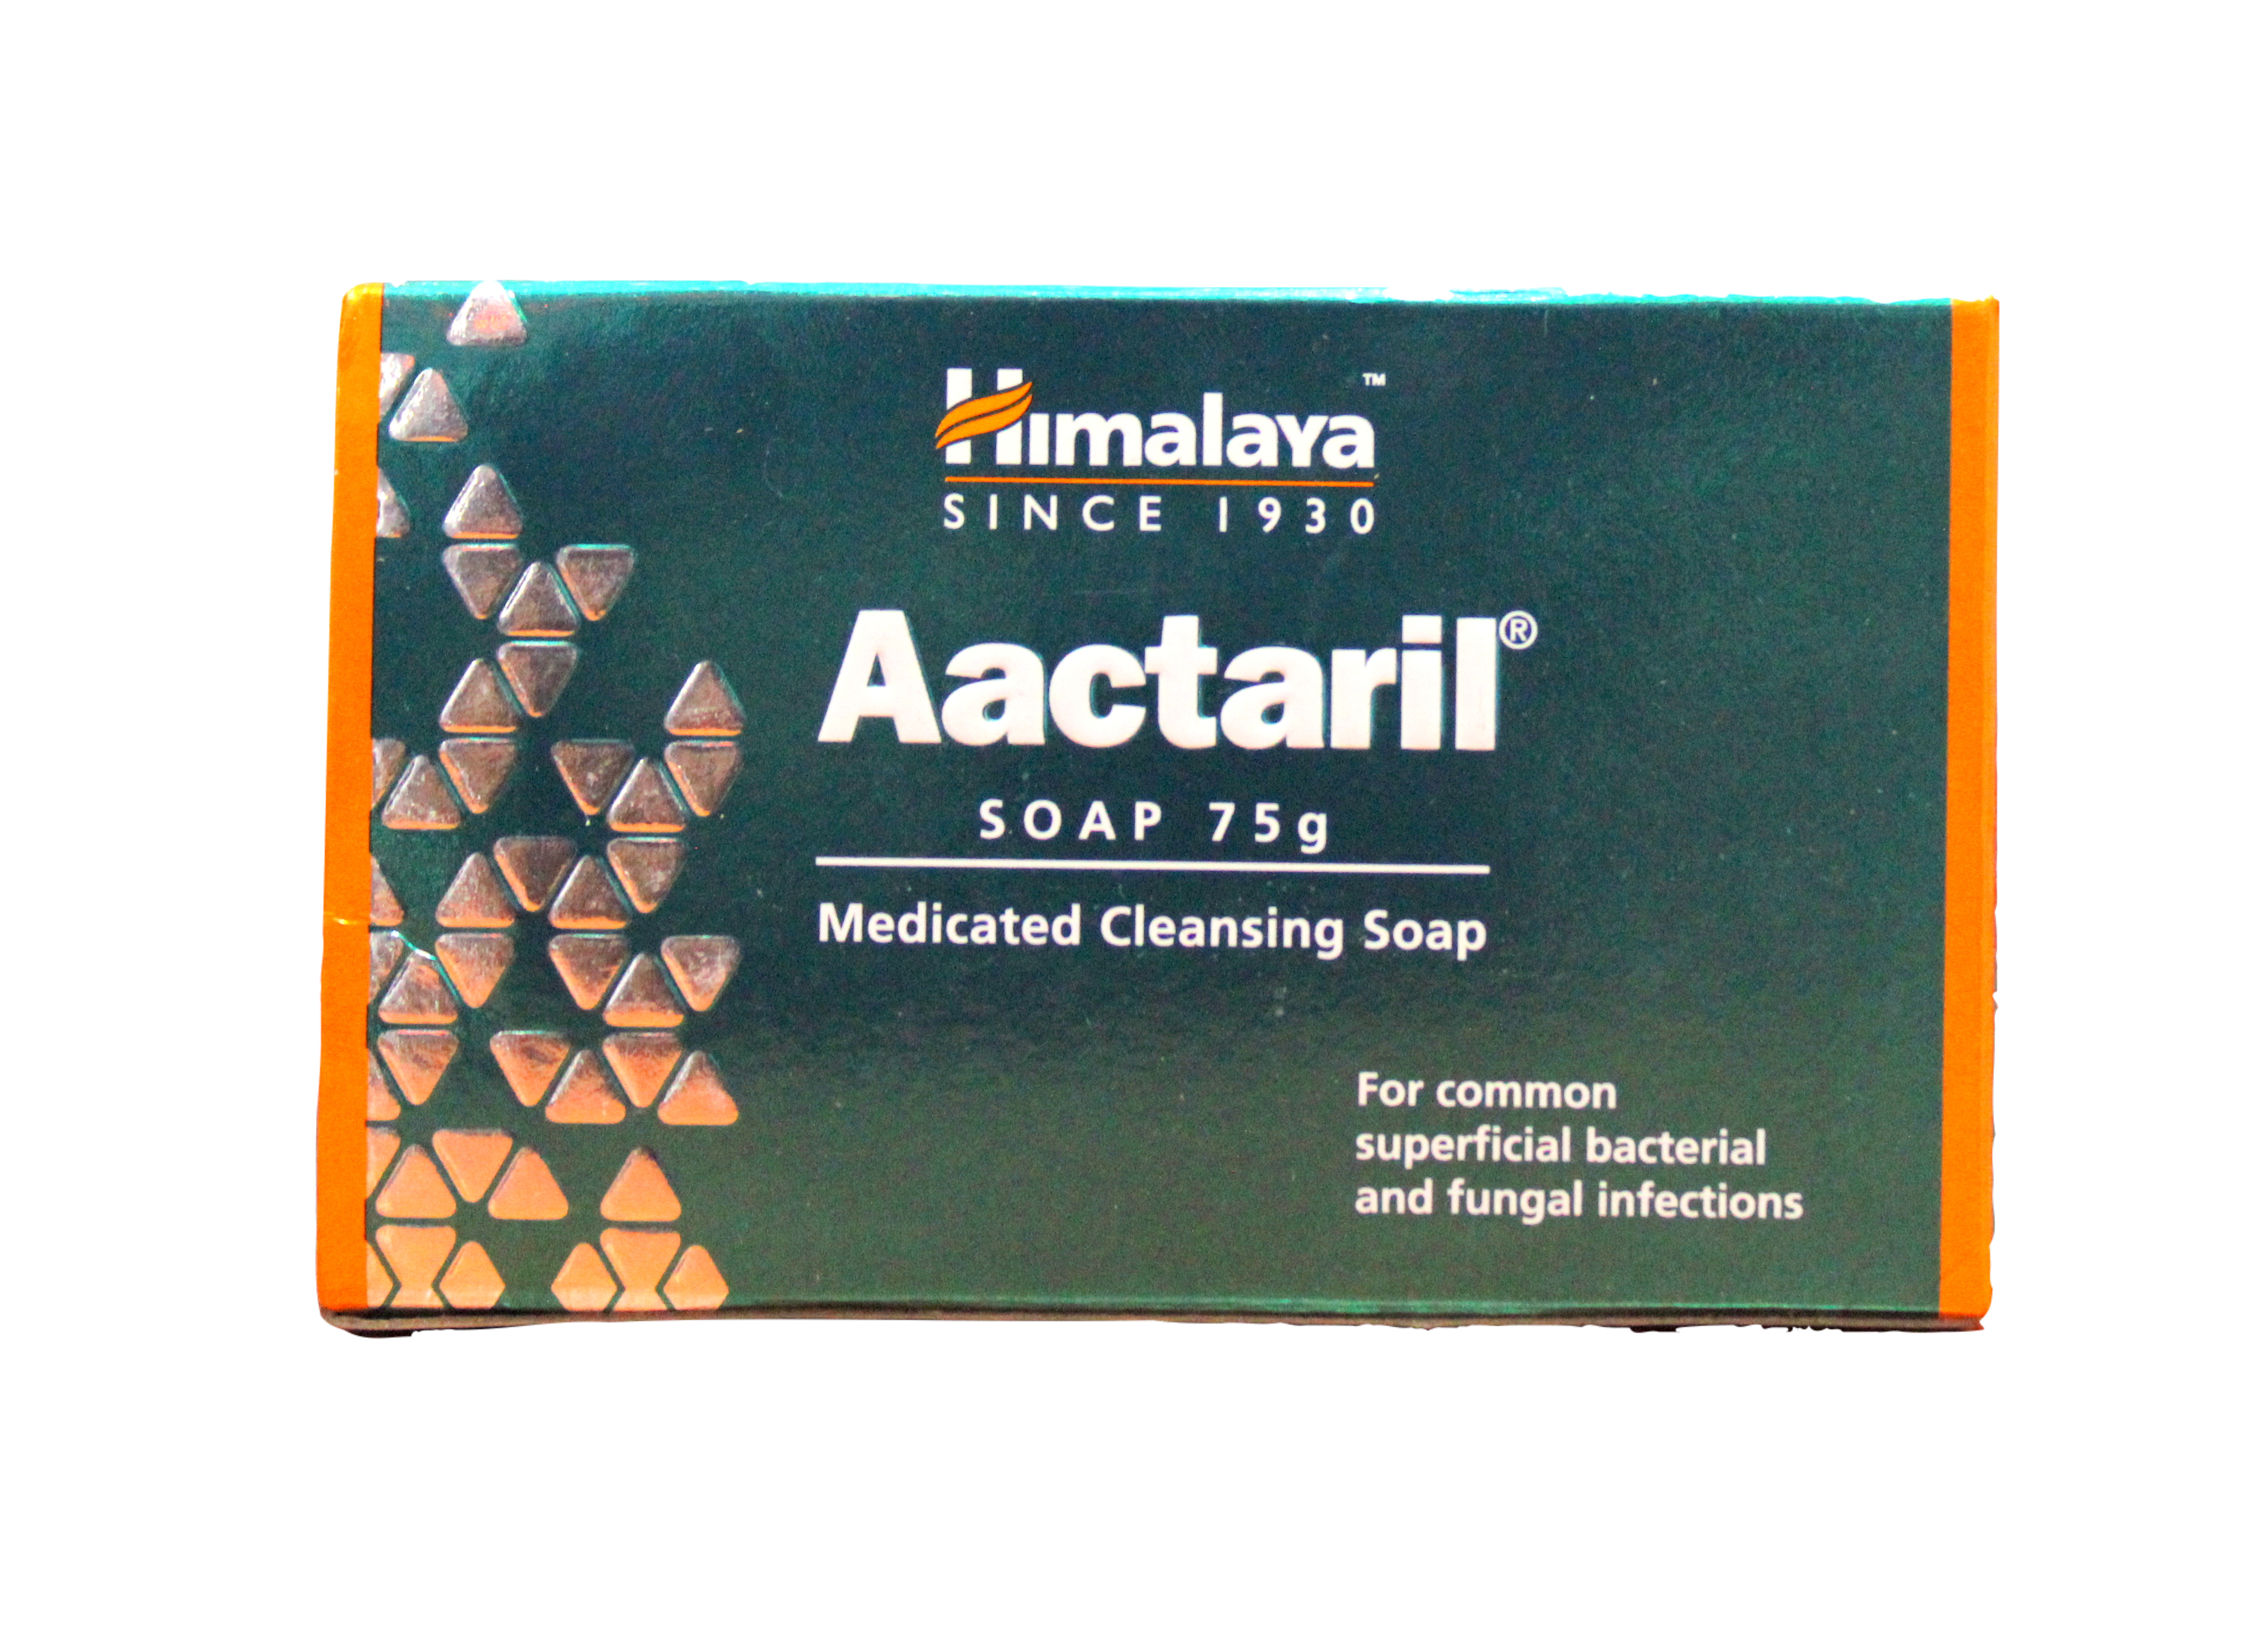 Shop Aactaril soap 75gm at price 80.00 from Himalaya Online - Ayush Care